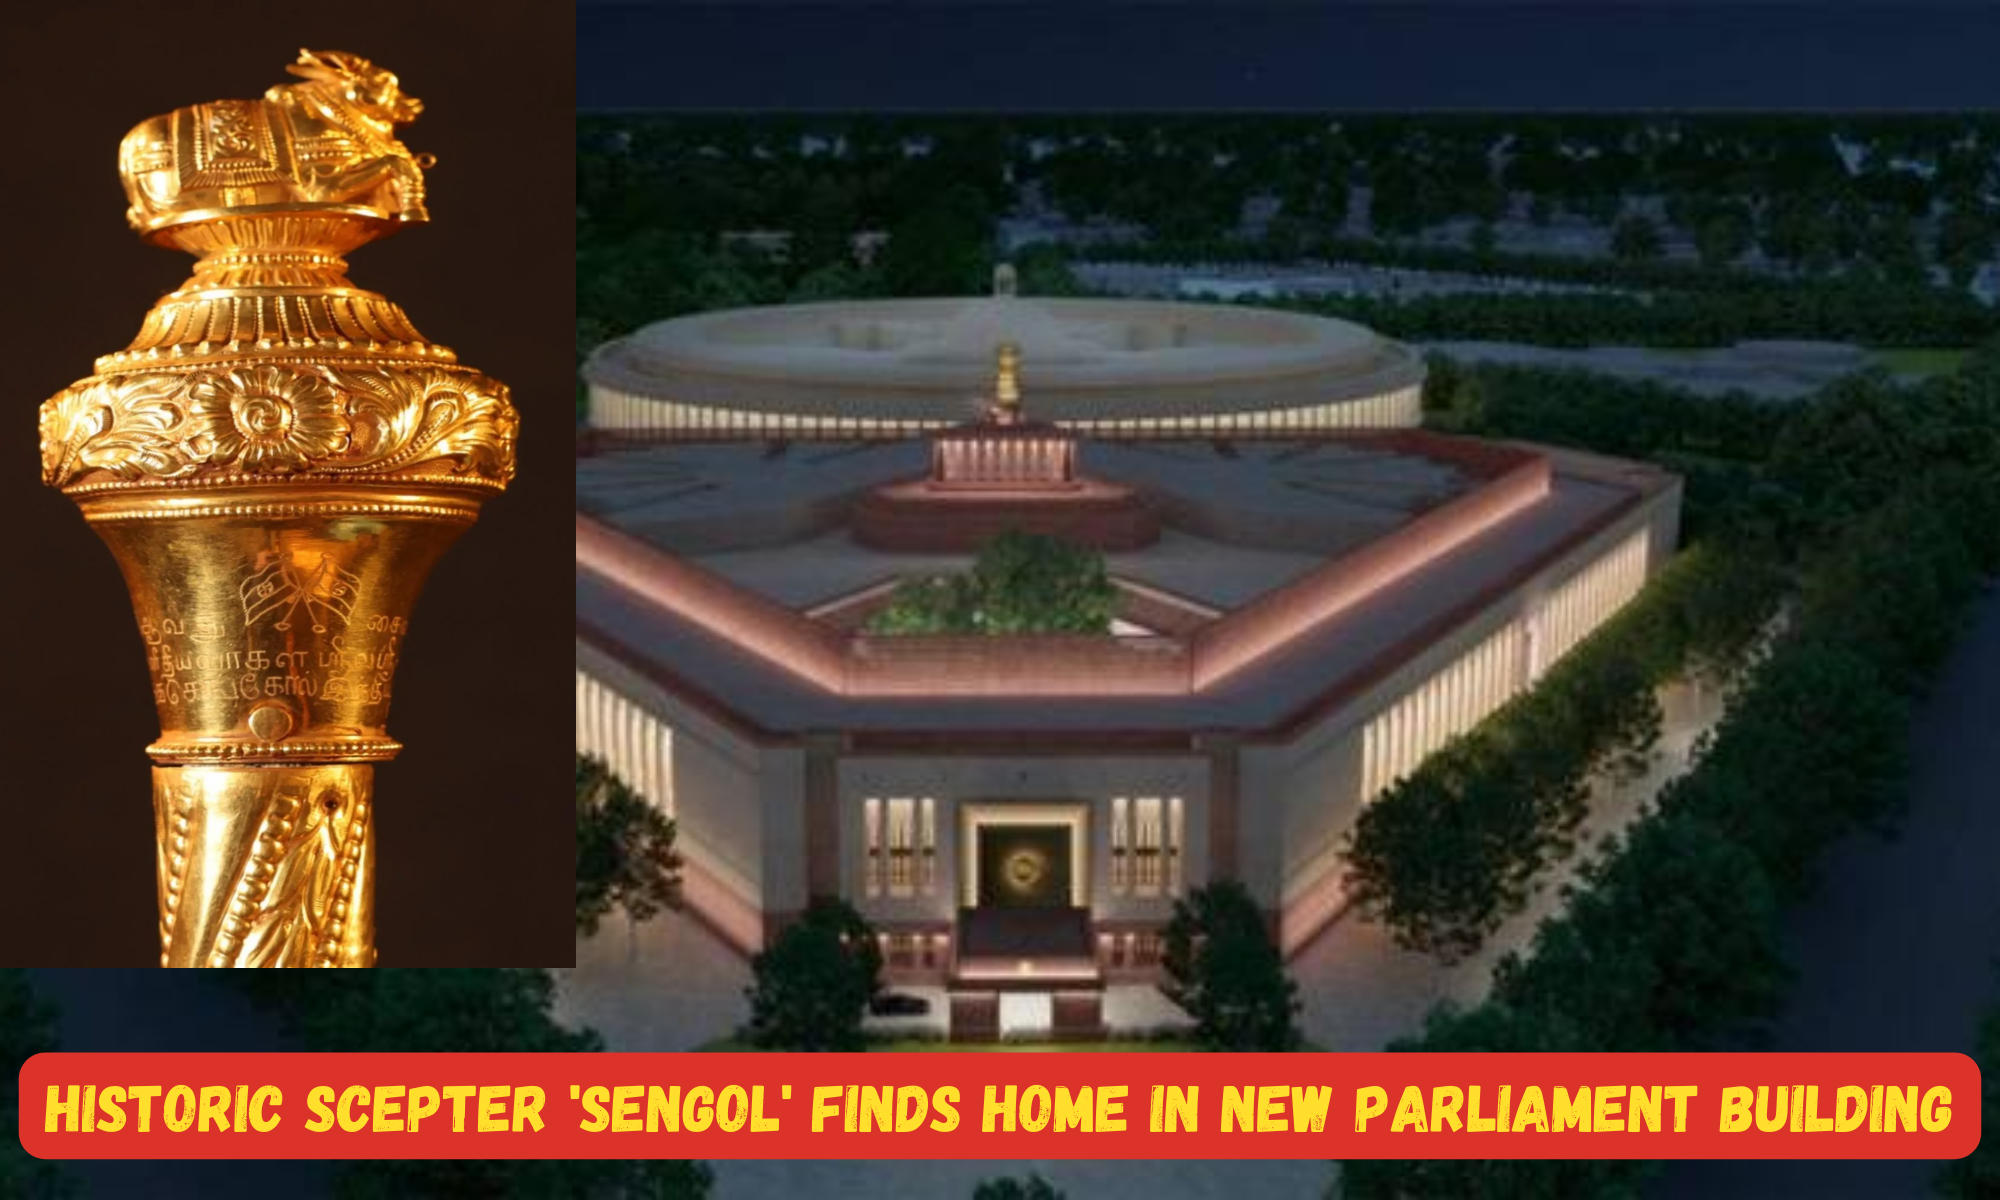 Historic Scepter 'Sengol' Finds Home in New Parliament Building